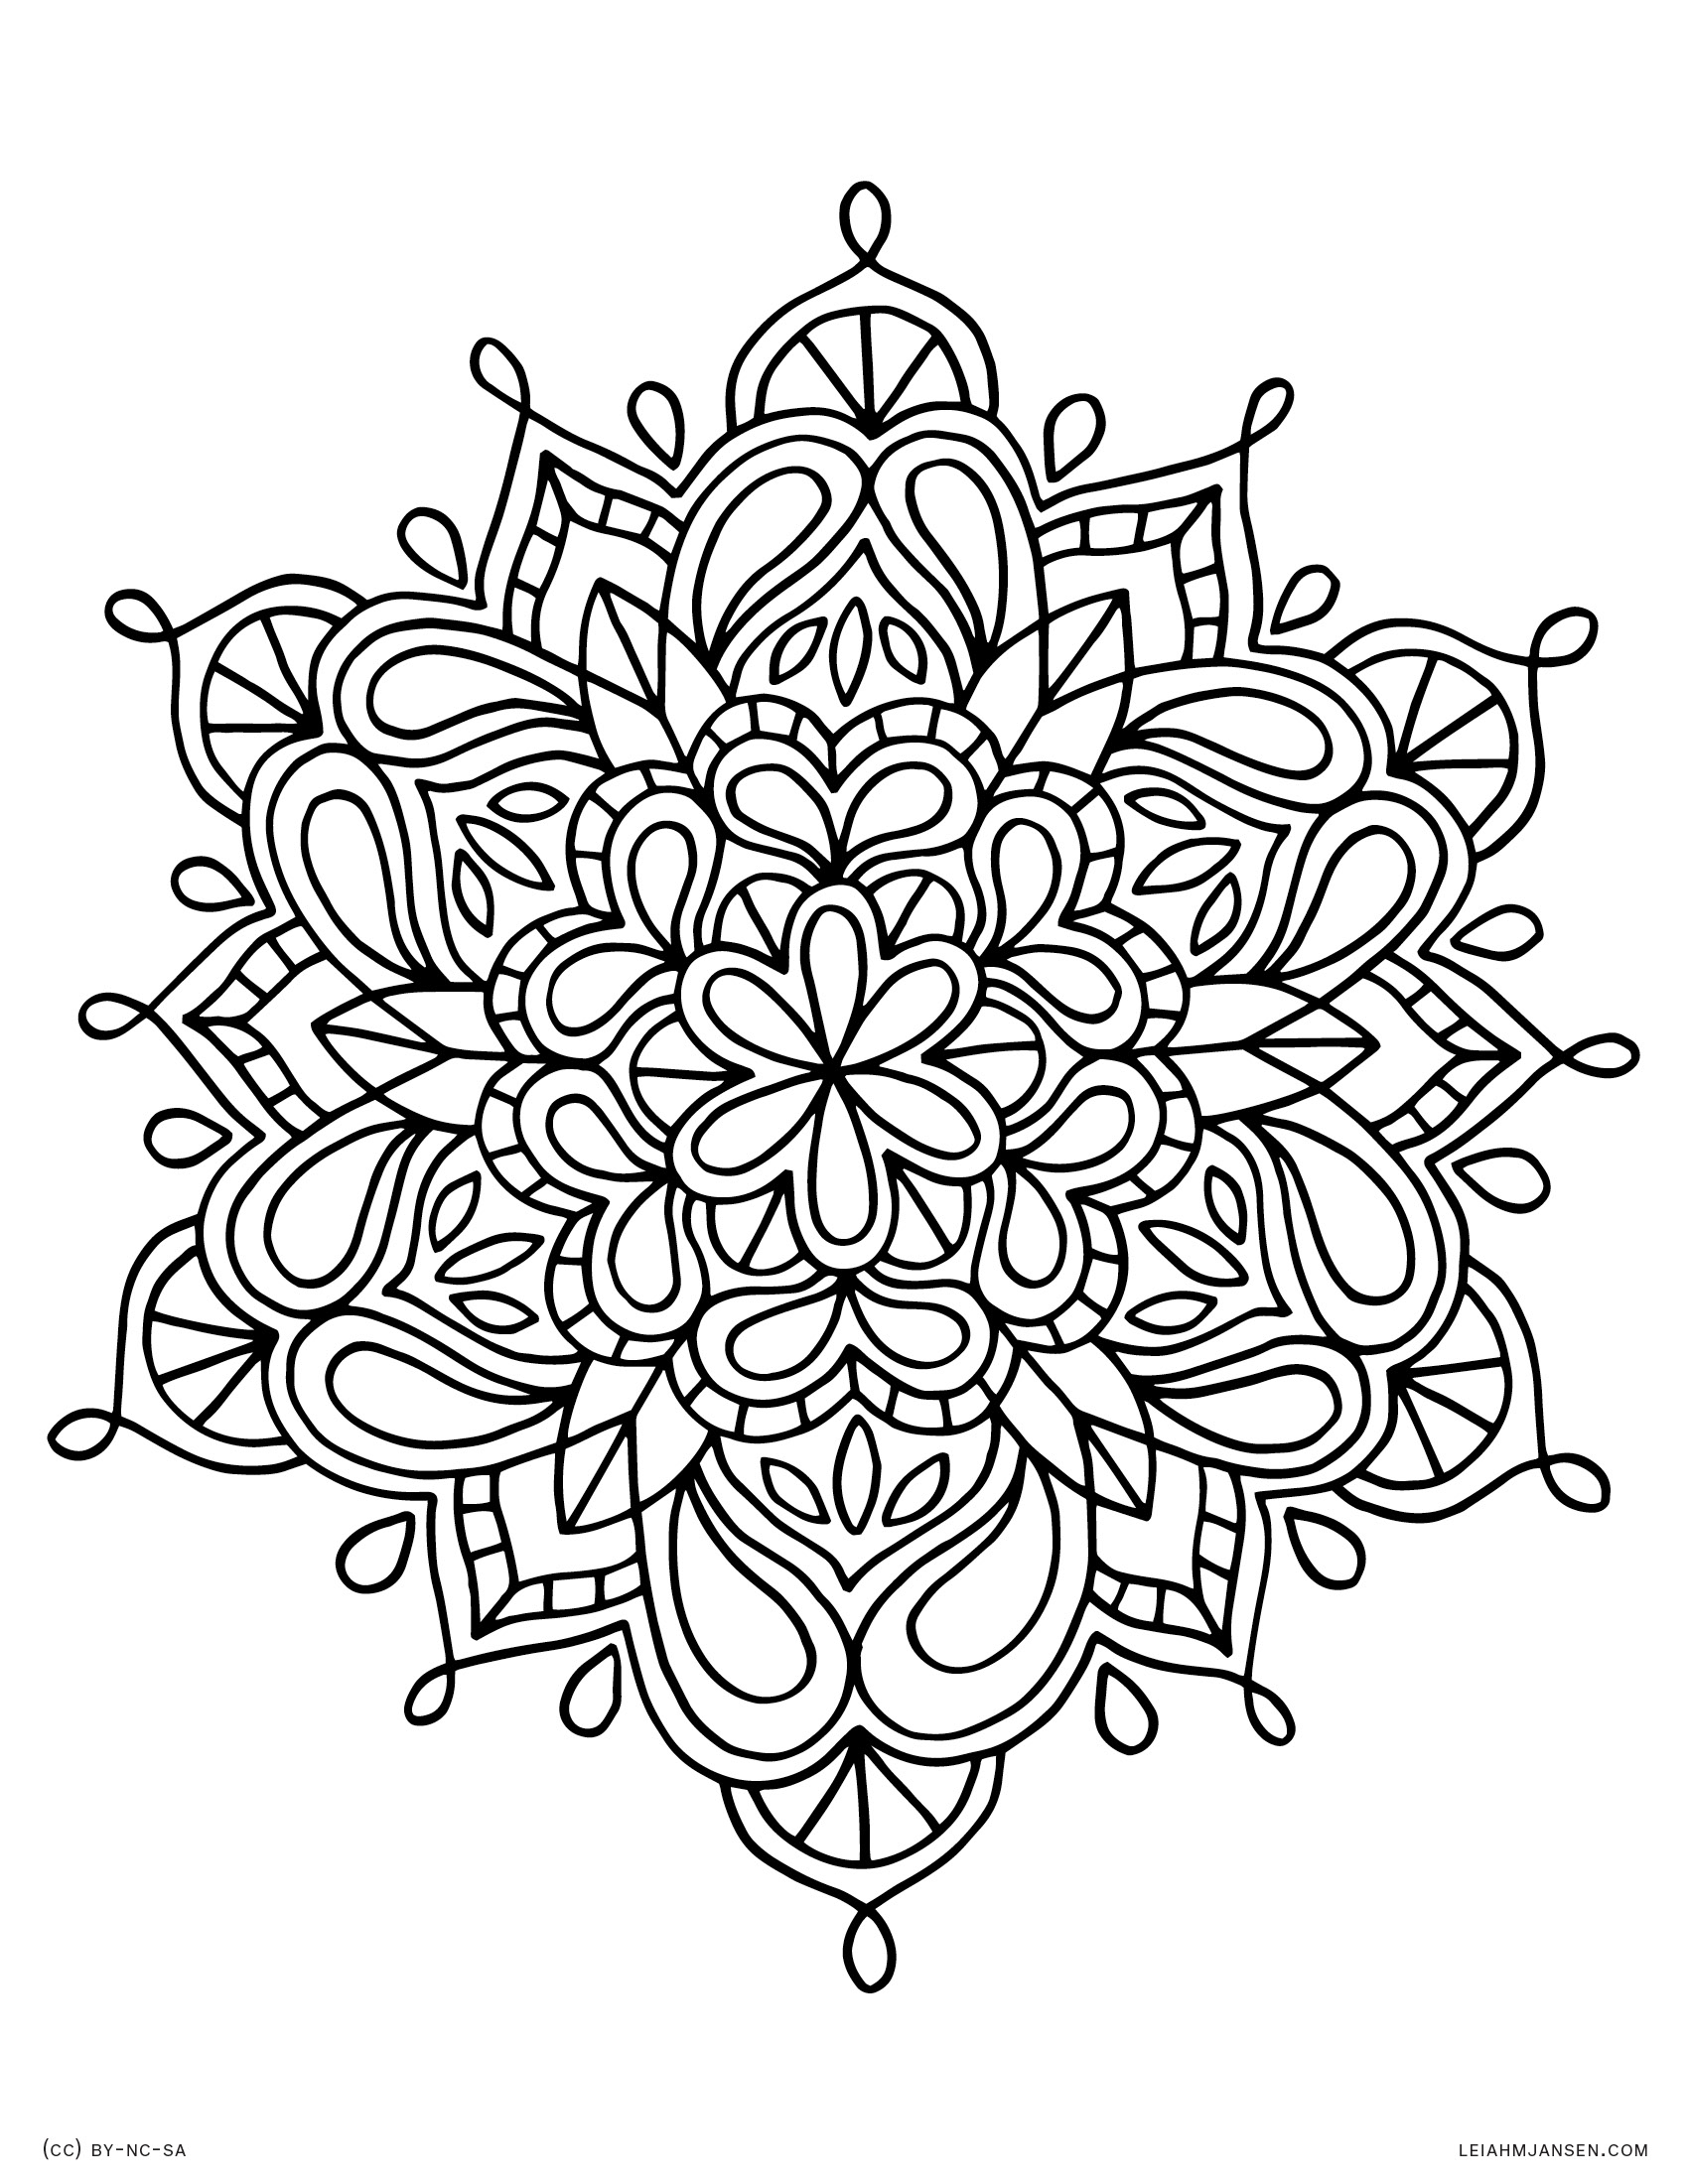 Convert Pictures To Coloring Pages Coloring Pages And Books Coloring Pages Lmj Page Mandala Picture